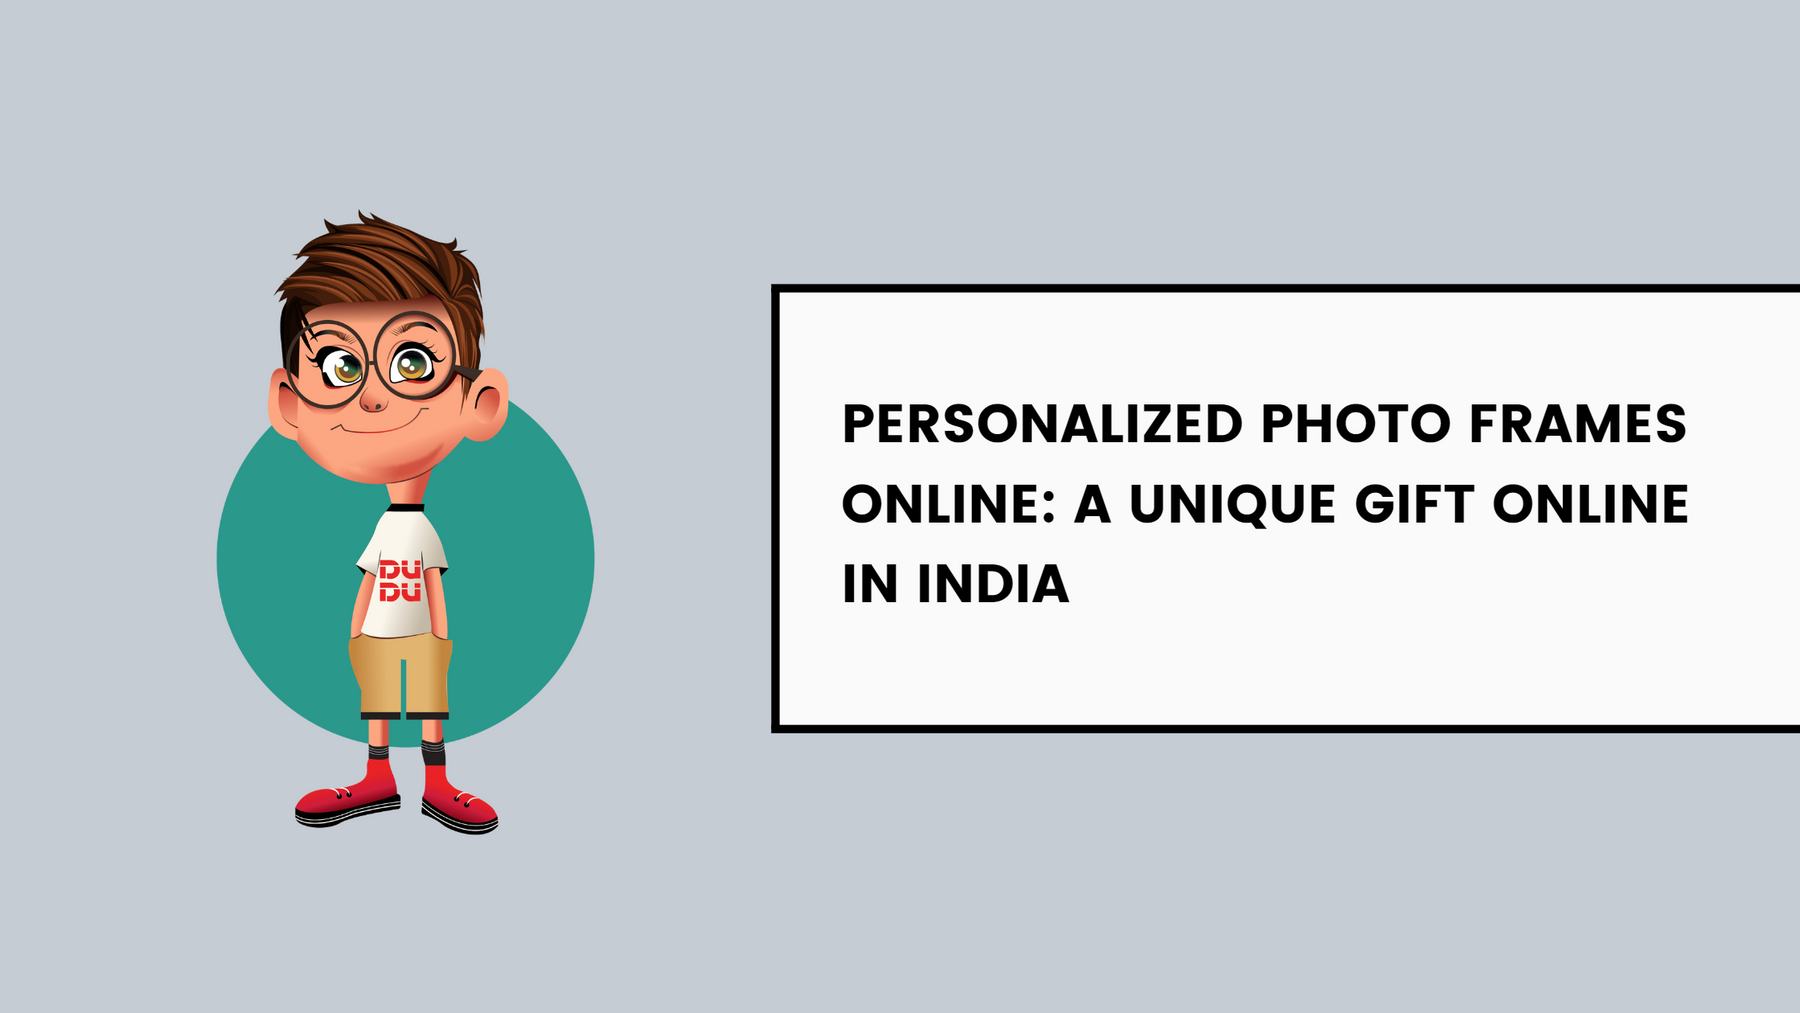 Personalized Photo Frames Online: A Unique Gift Online in India